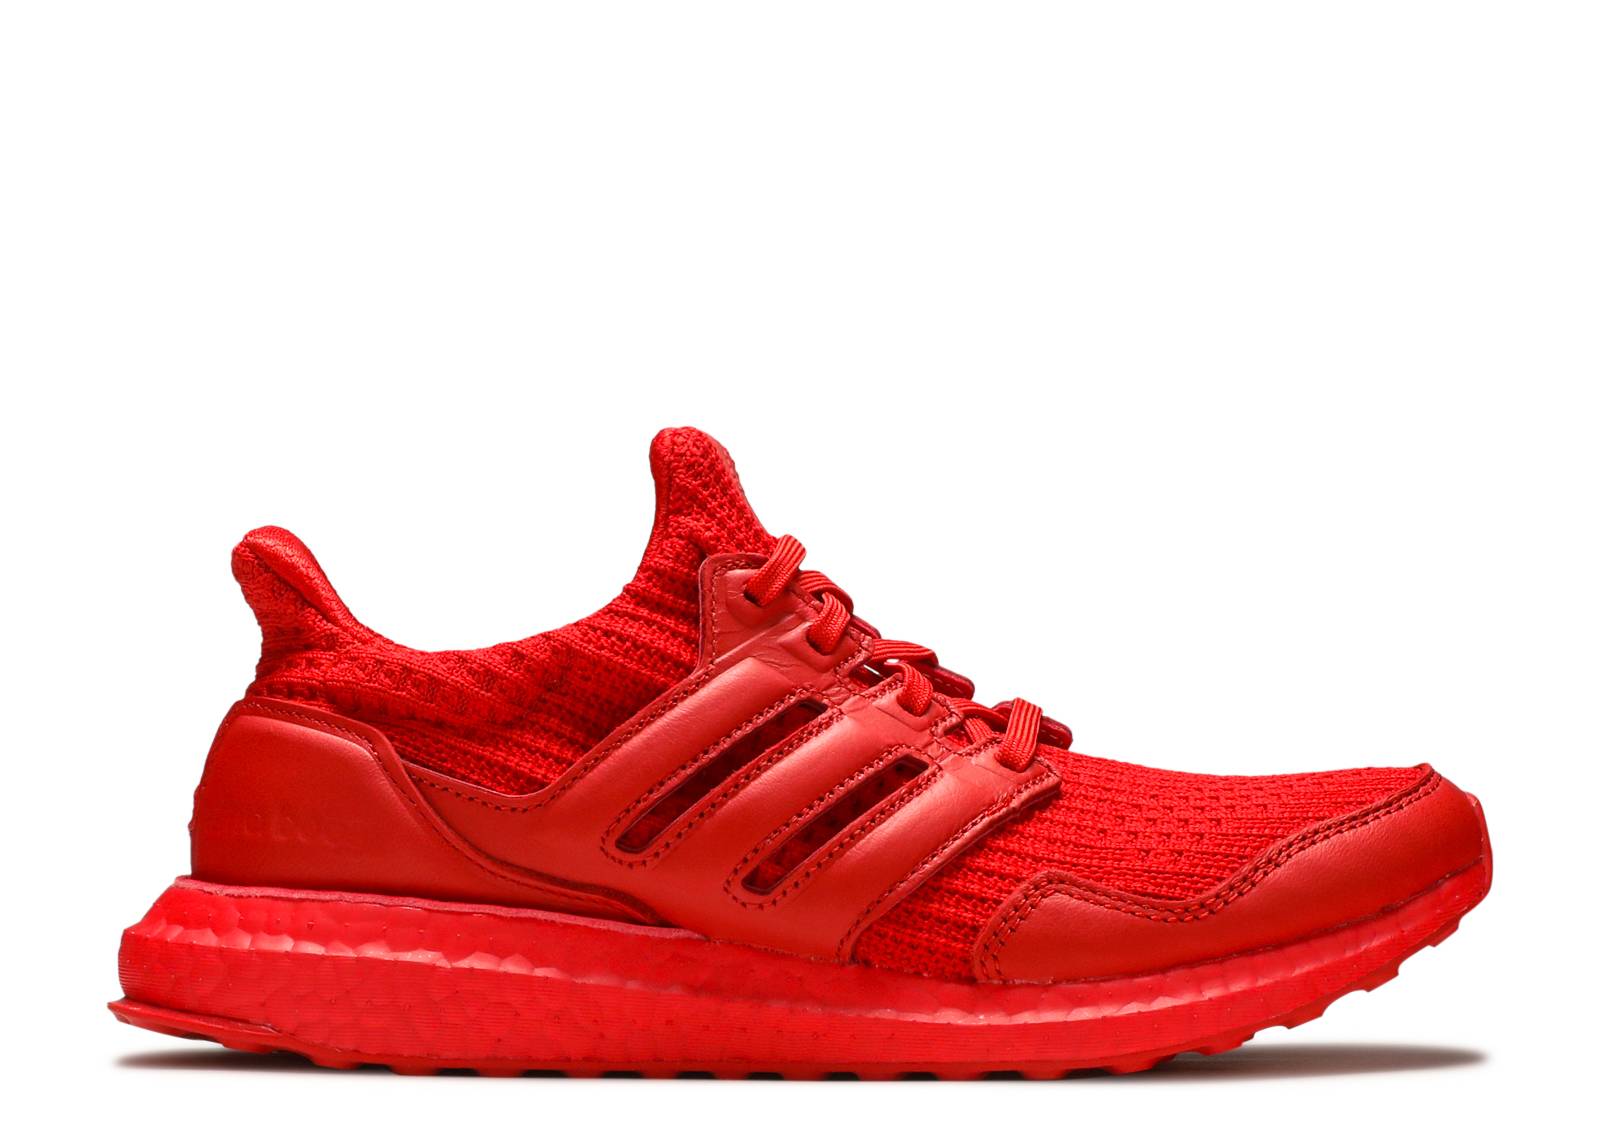 Wmns UltraBoost DNA S&L 'Lush Red'